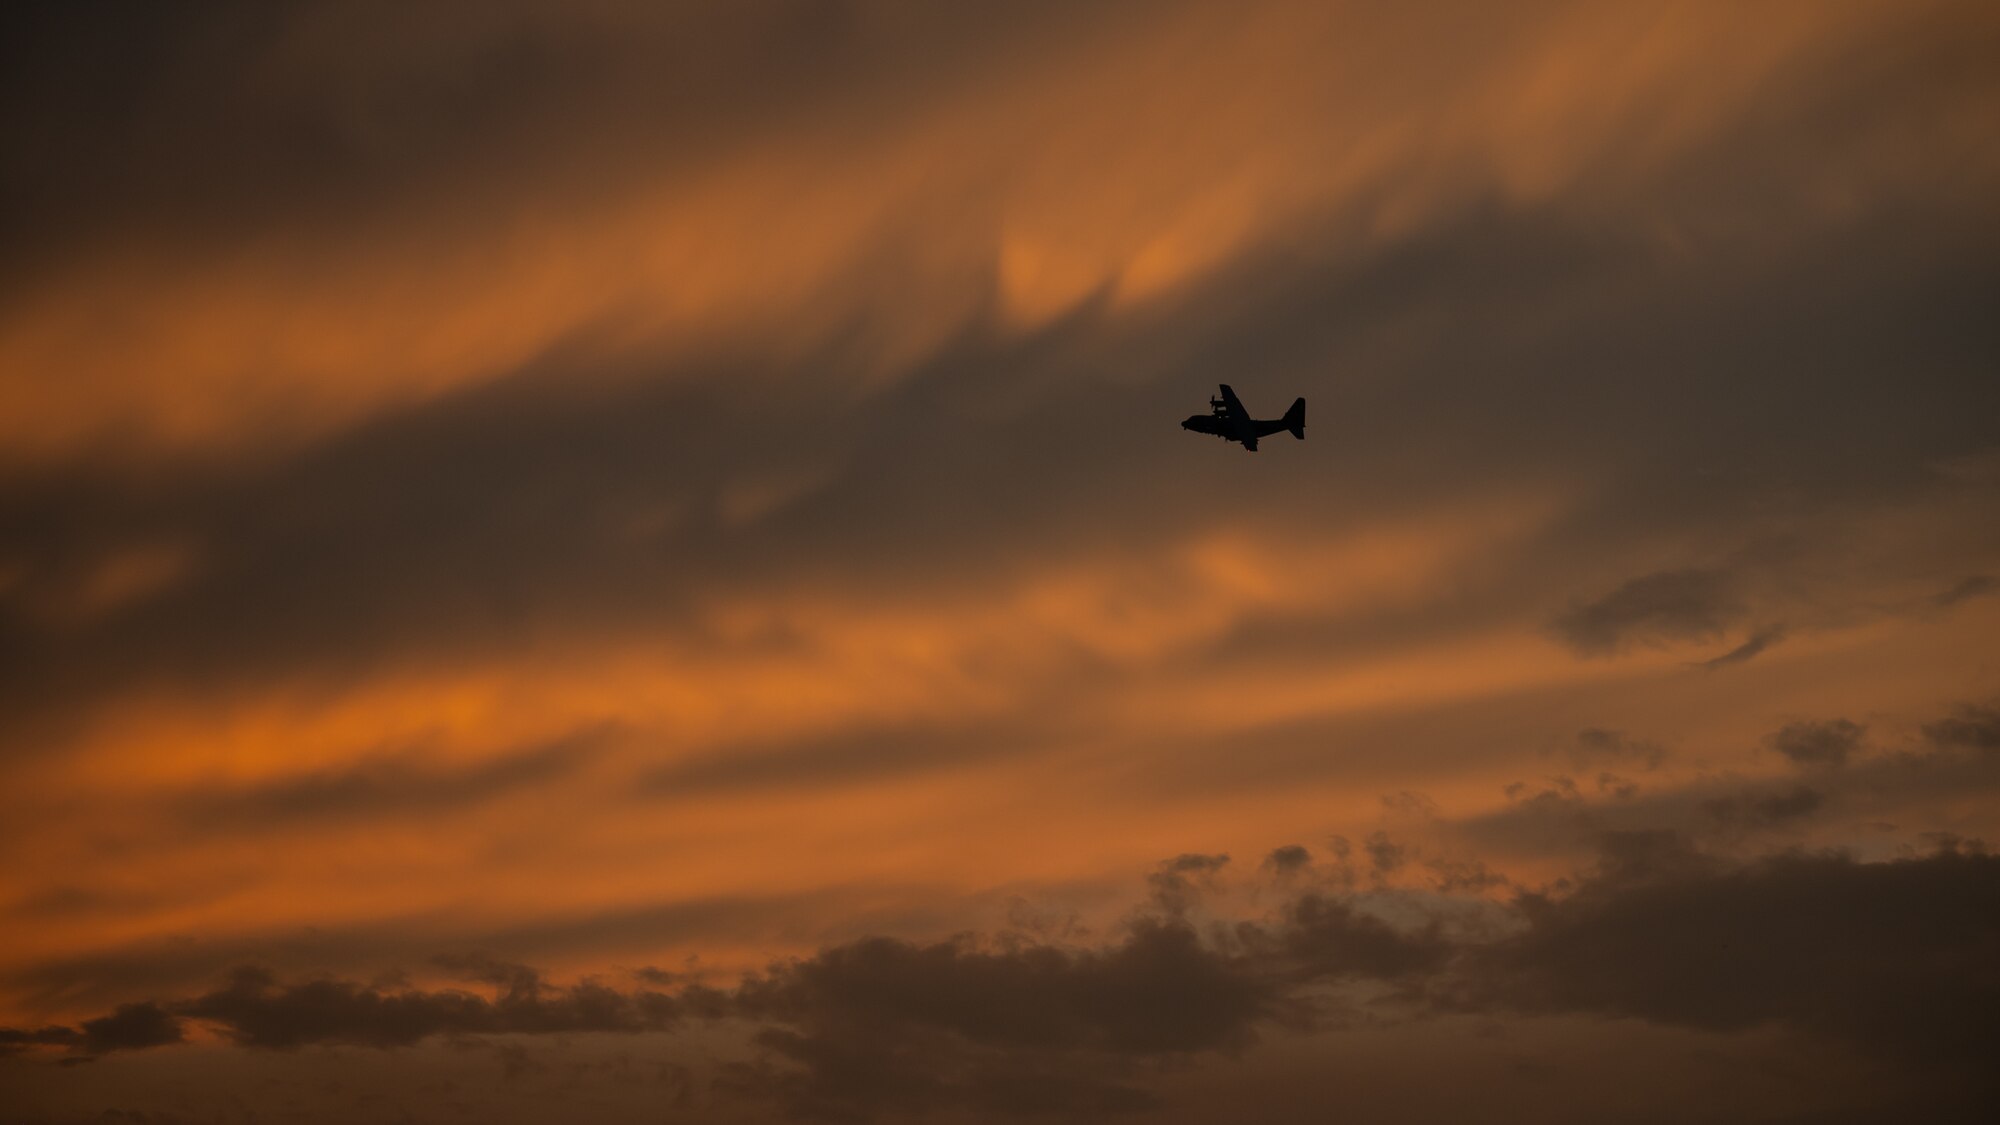 A C-130 aircraft flies in front of orange clouds during sunset.